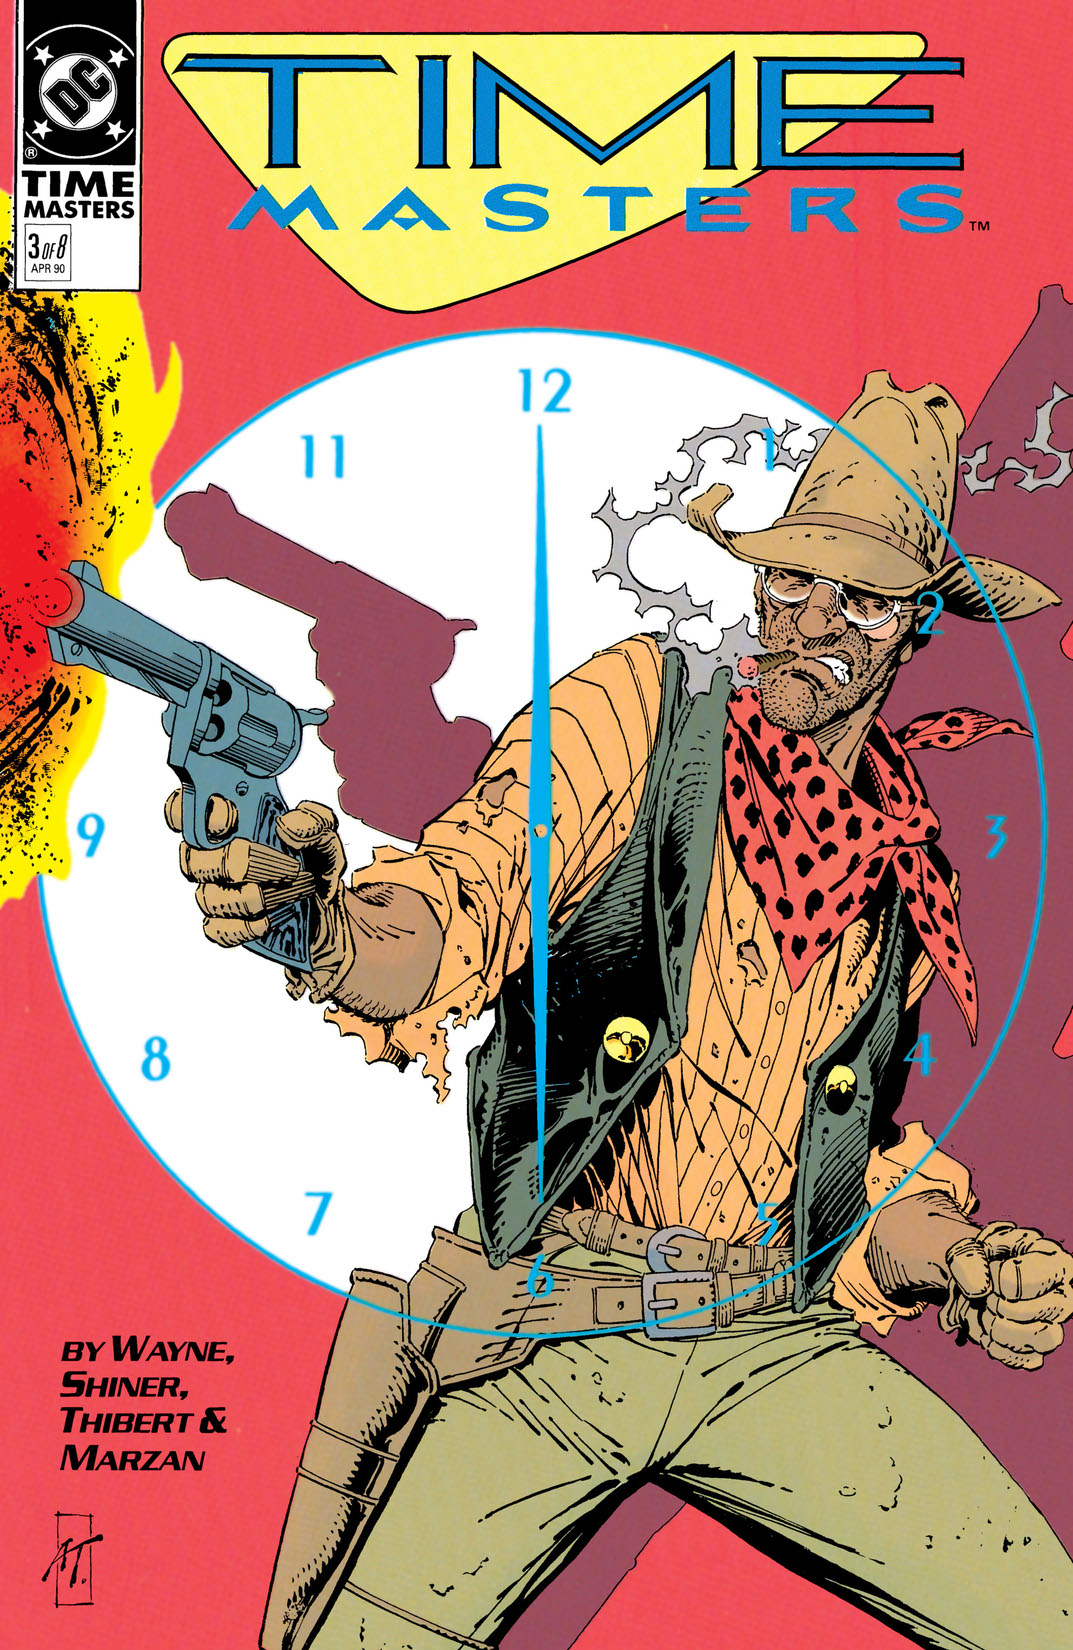 Time Masters #3 preview images